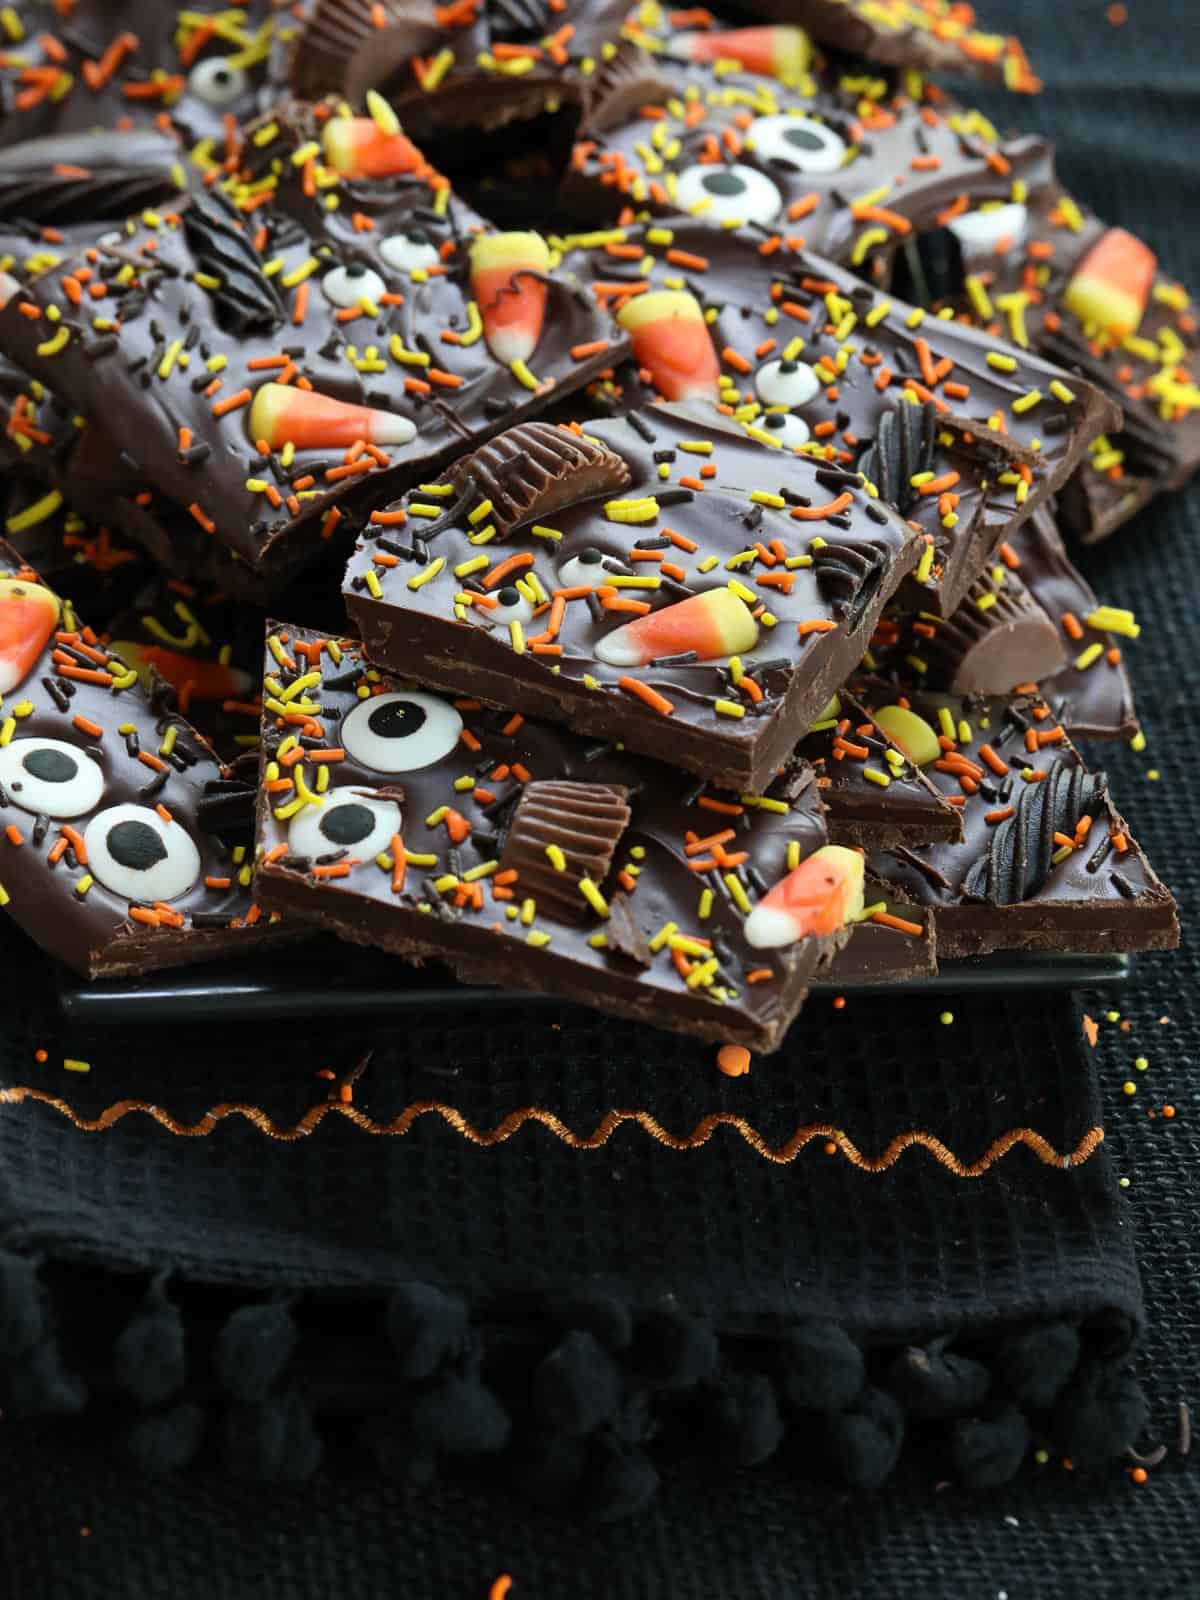 Halloween bark made from chocolate, candy, and sprinkles with candy eyeballs for a treat.